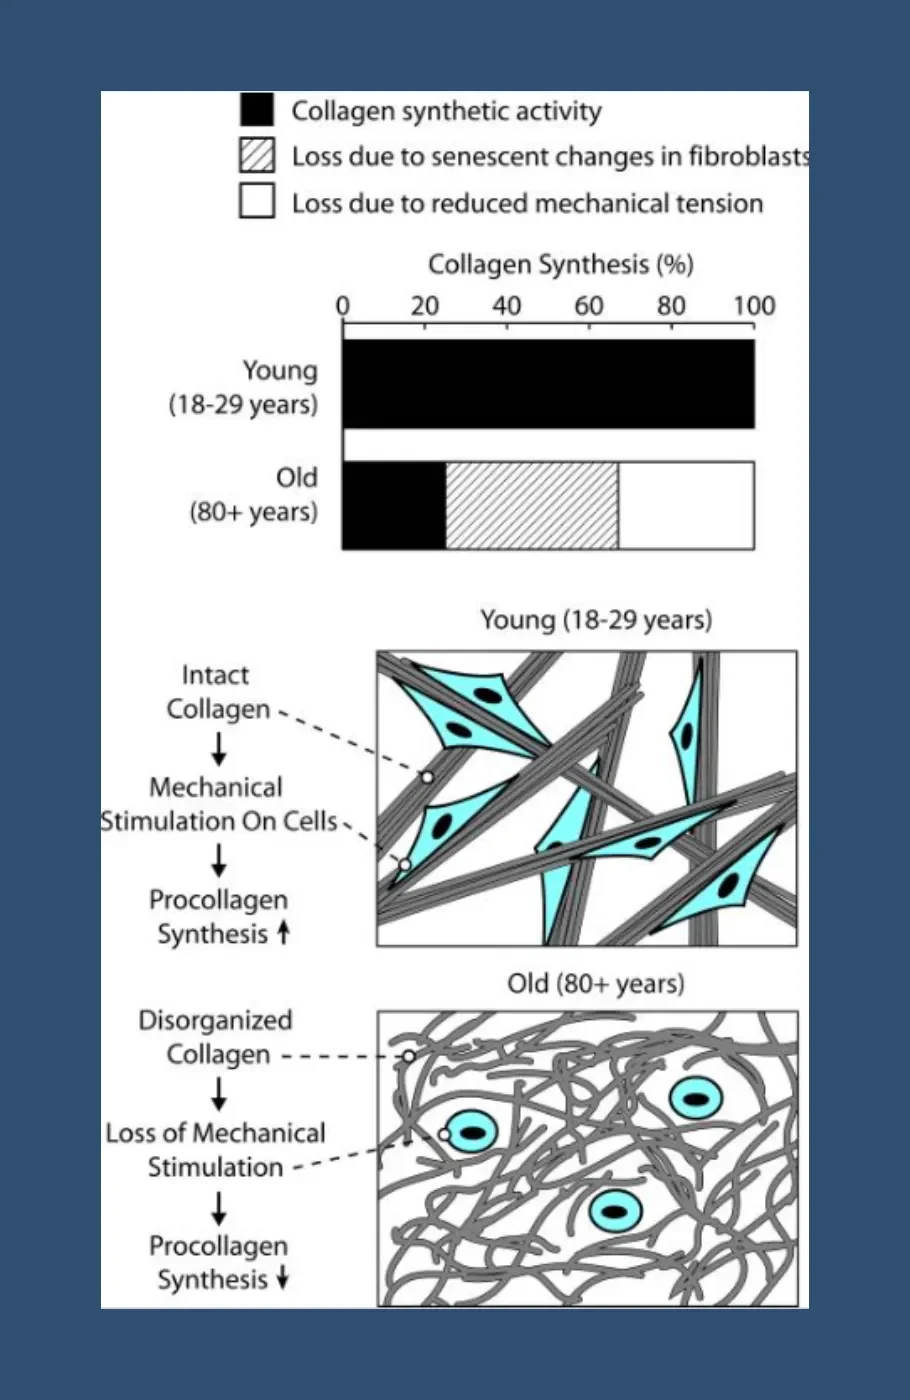 Illustration showing the difference between collagen when someone is young (18-29 years old) versus when they're older (80+ years old).